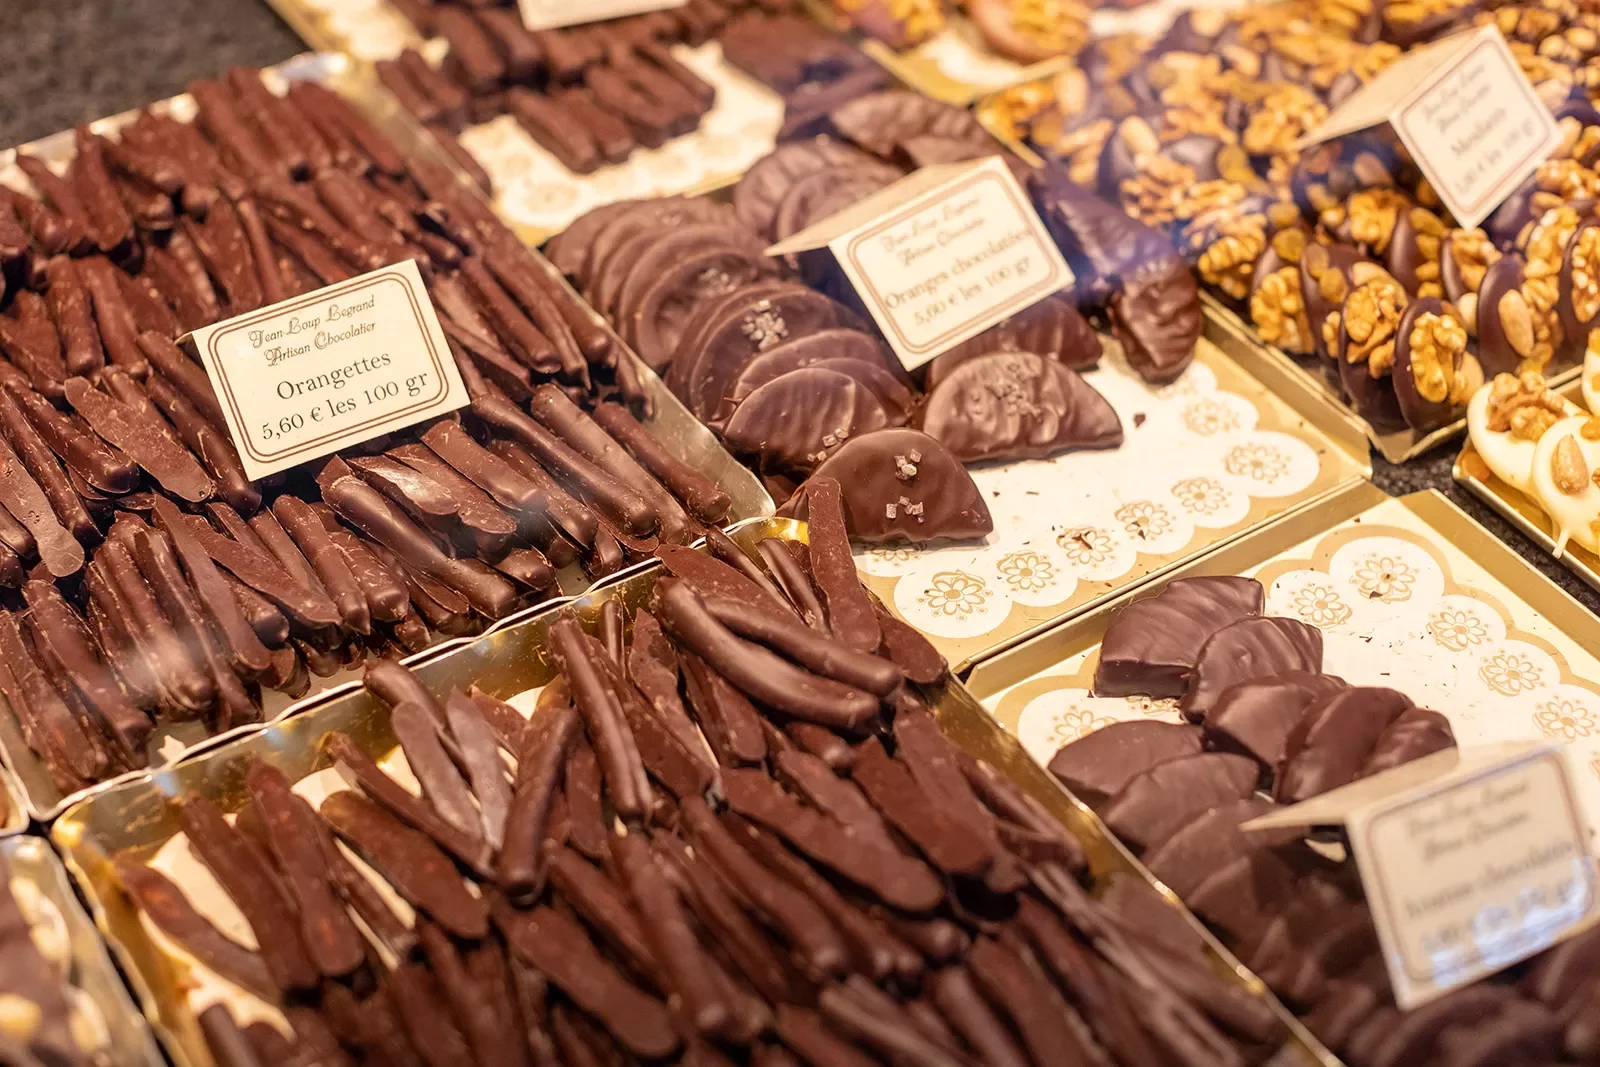 Close-up of confectionary shop. Chocolate orange peels, slices seen.